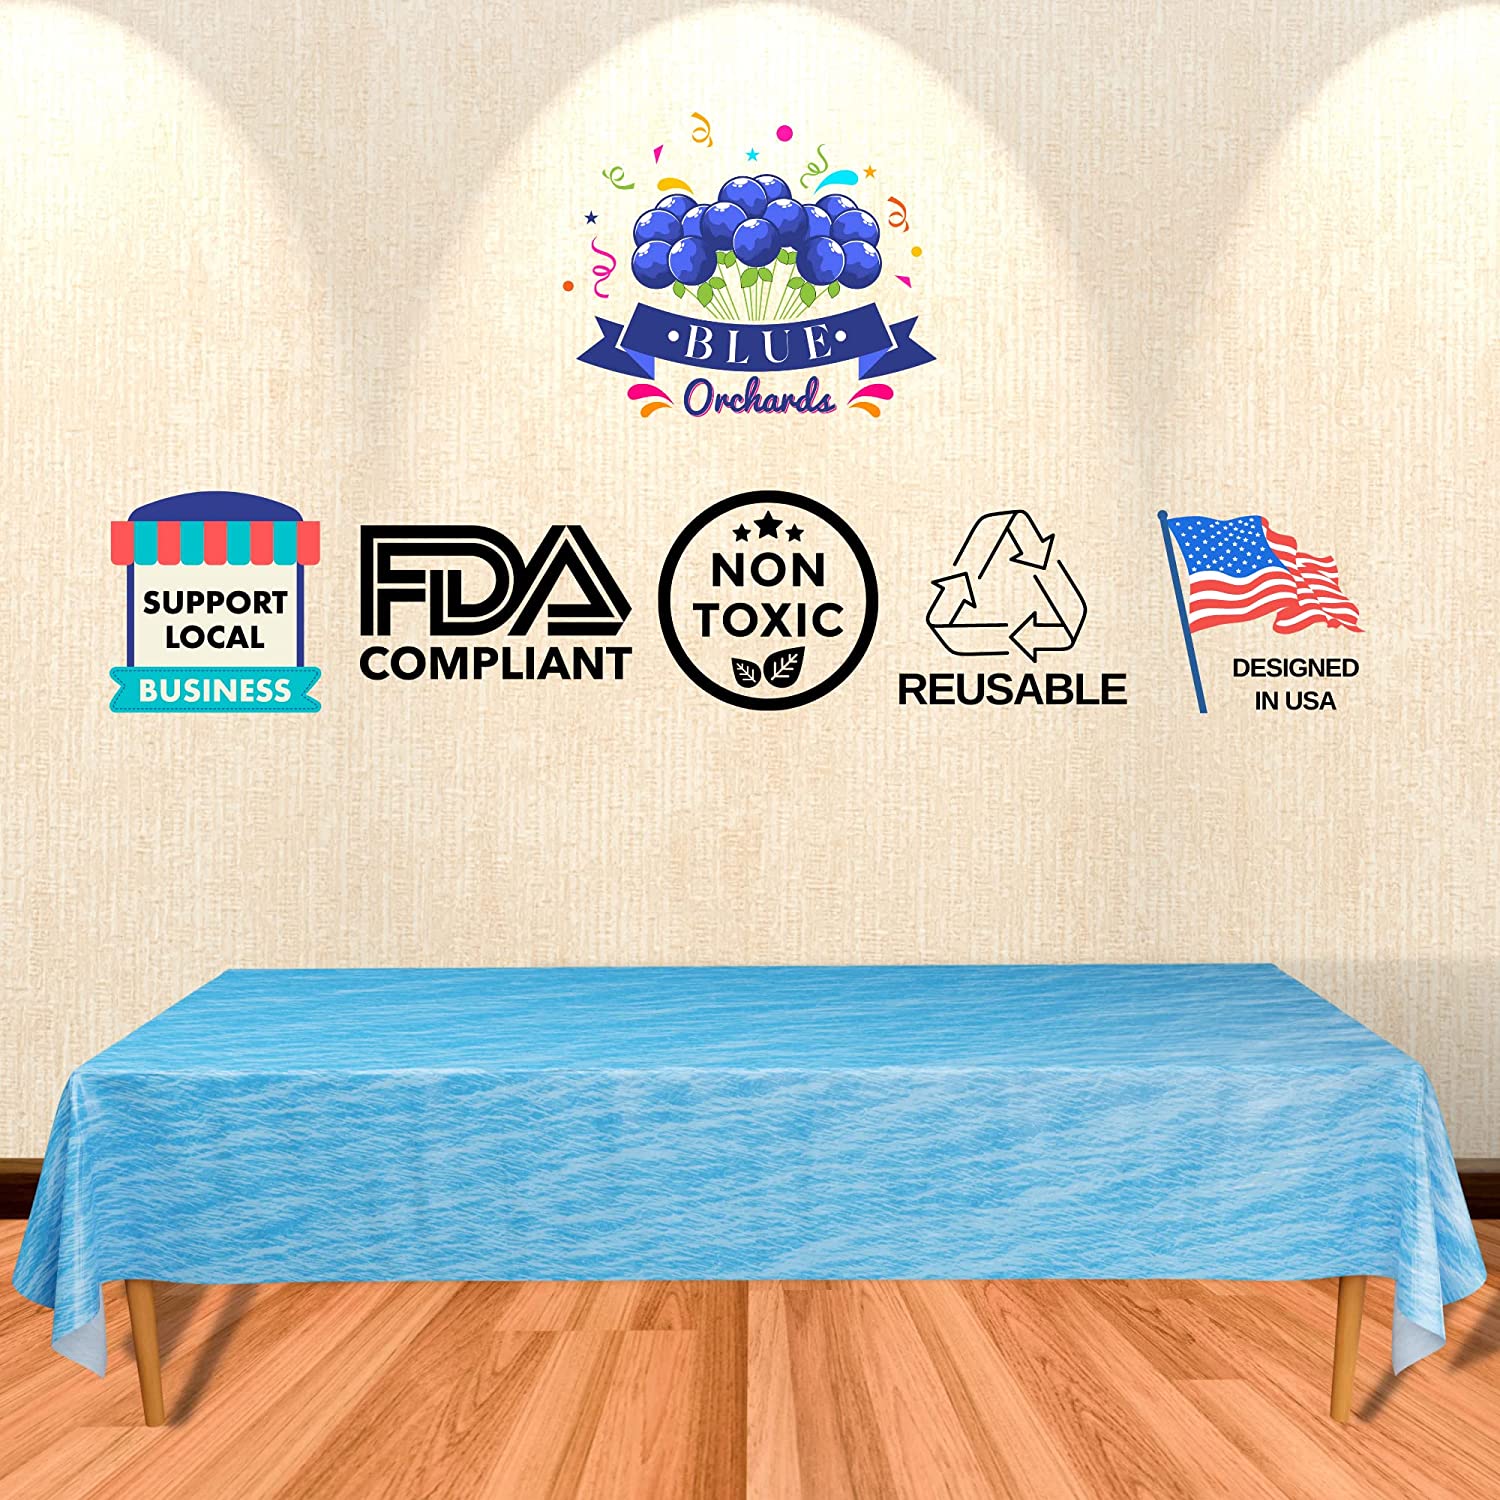 Ocean Party Table Covers FDACompliant, NonToxic, Reusable, and Designed in USA